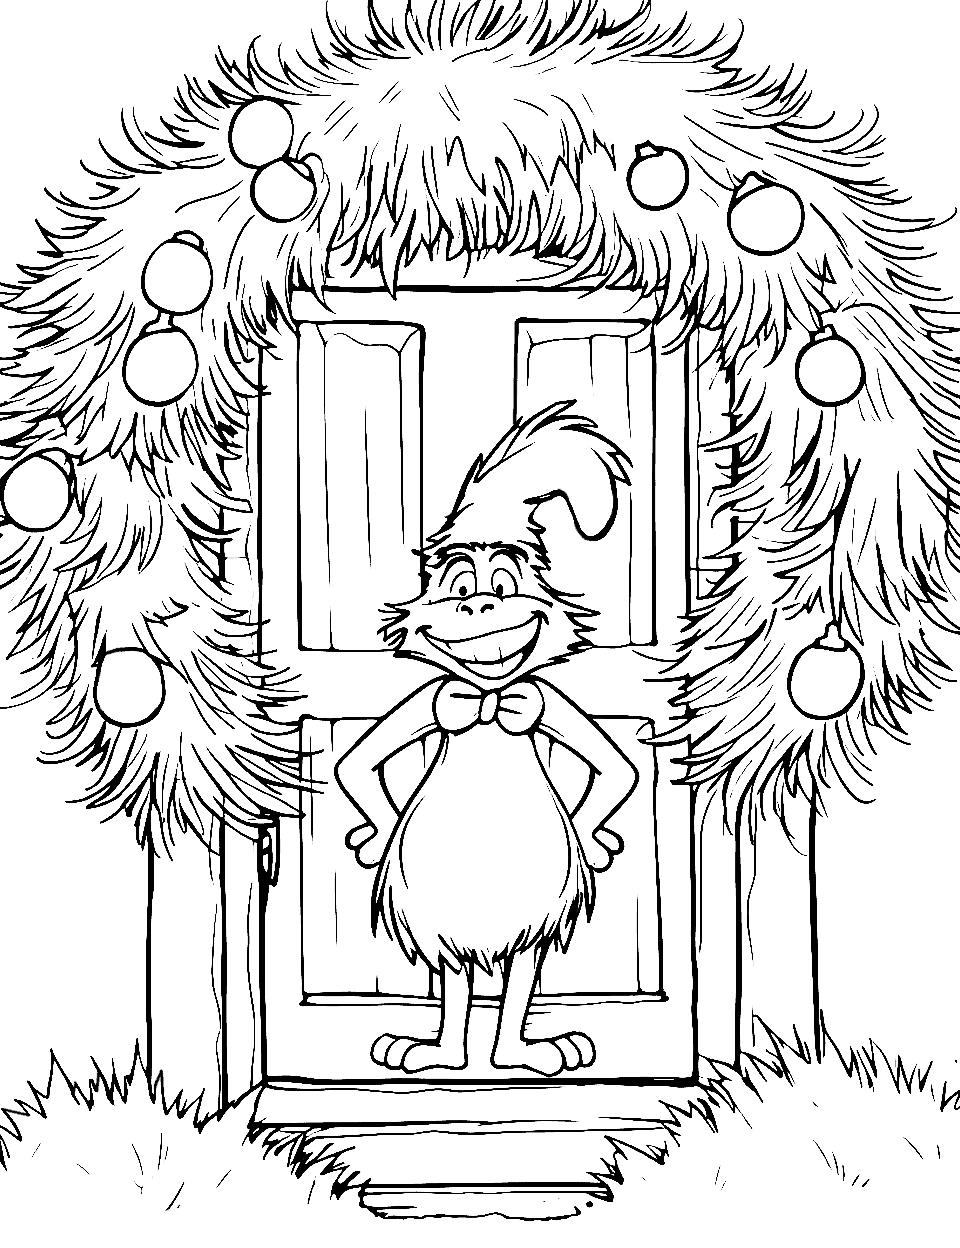 Wreath Hanging Coloring Page - The Grinch is showing his festive wreath on a door.